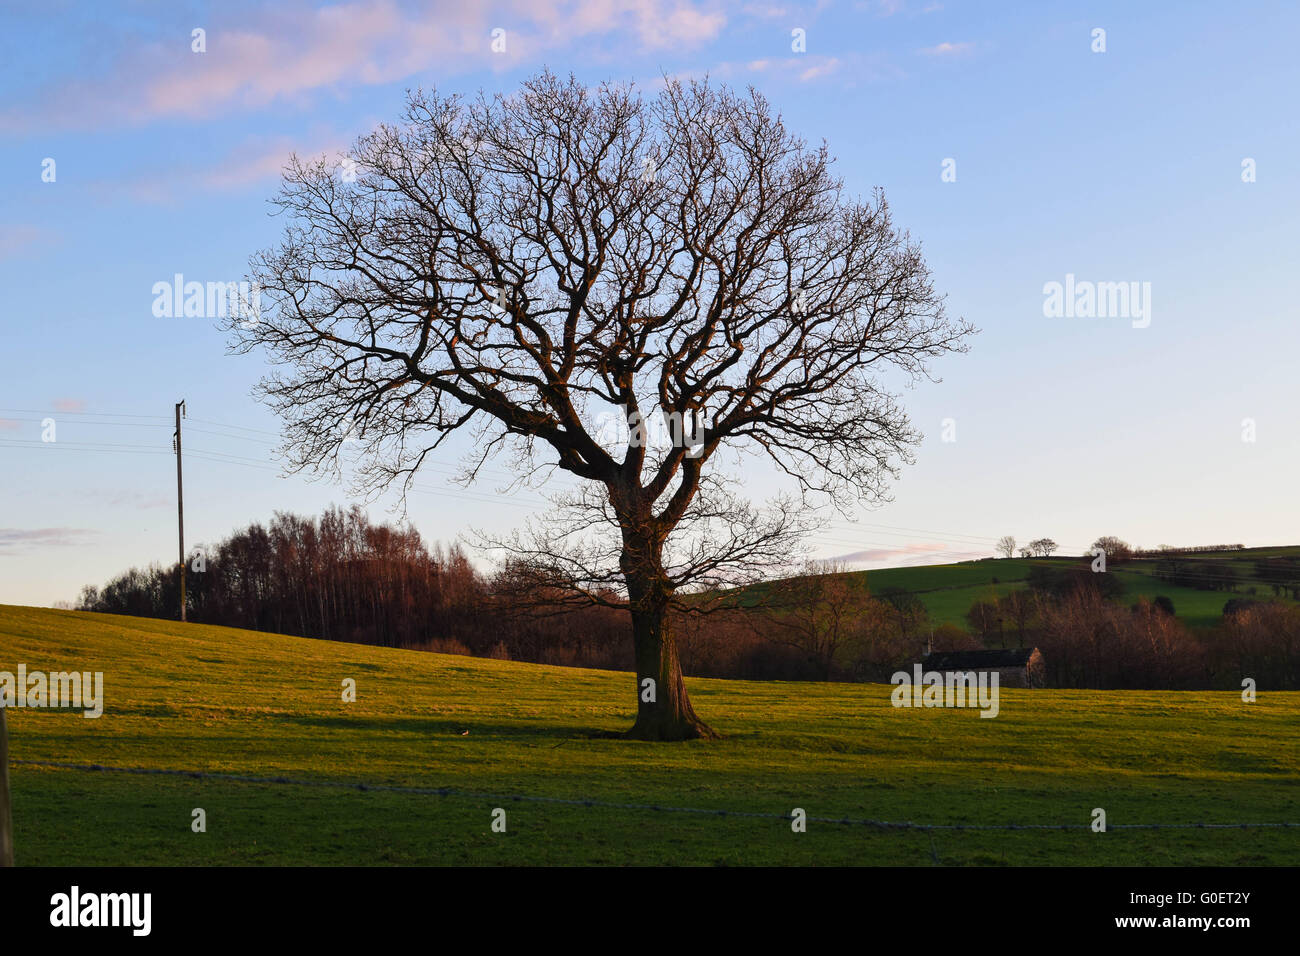 A tree in the middle of a field with a blue sky, pink clouds and hills in the background. Stock Photo